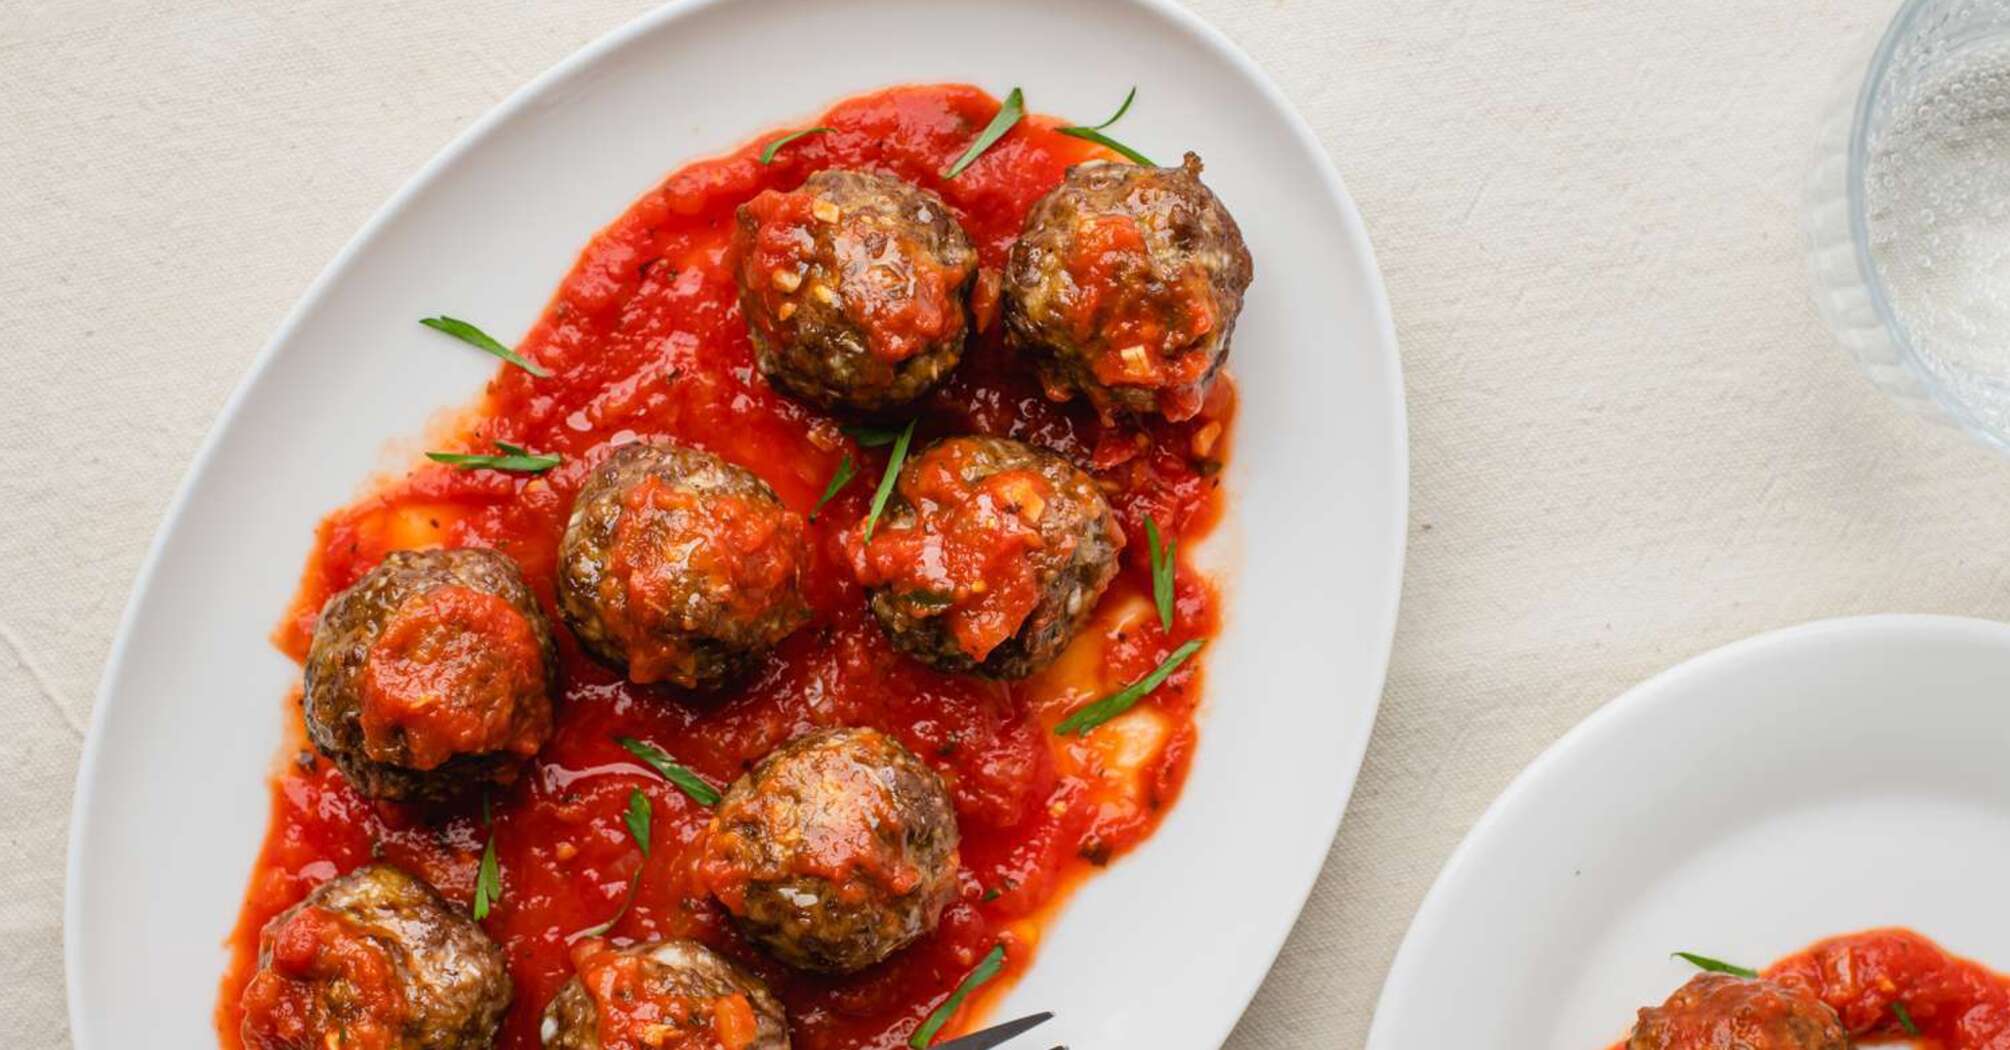 What to add to meatballs to make them hearty and juicy